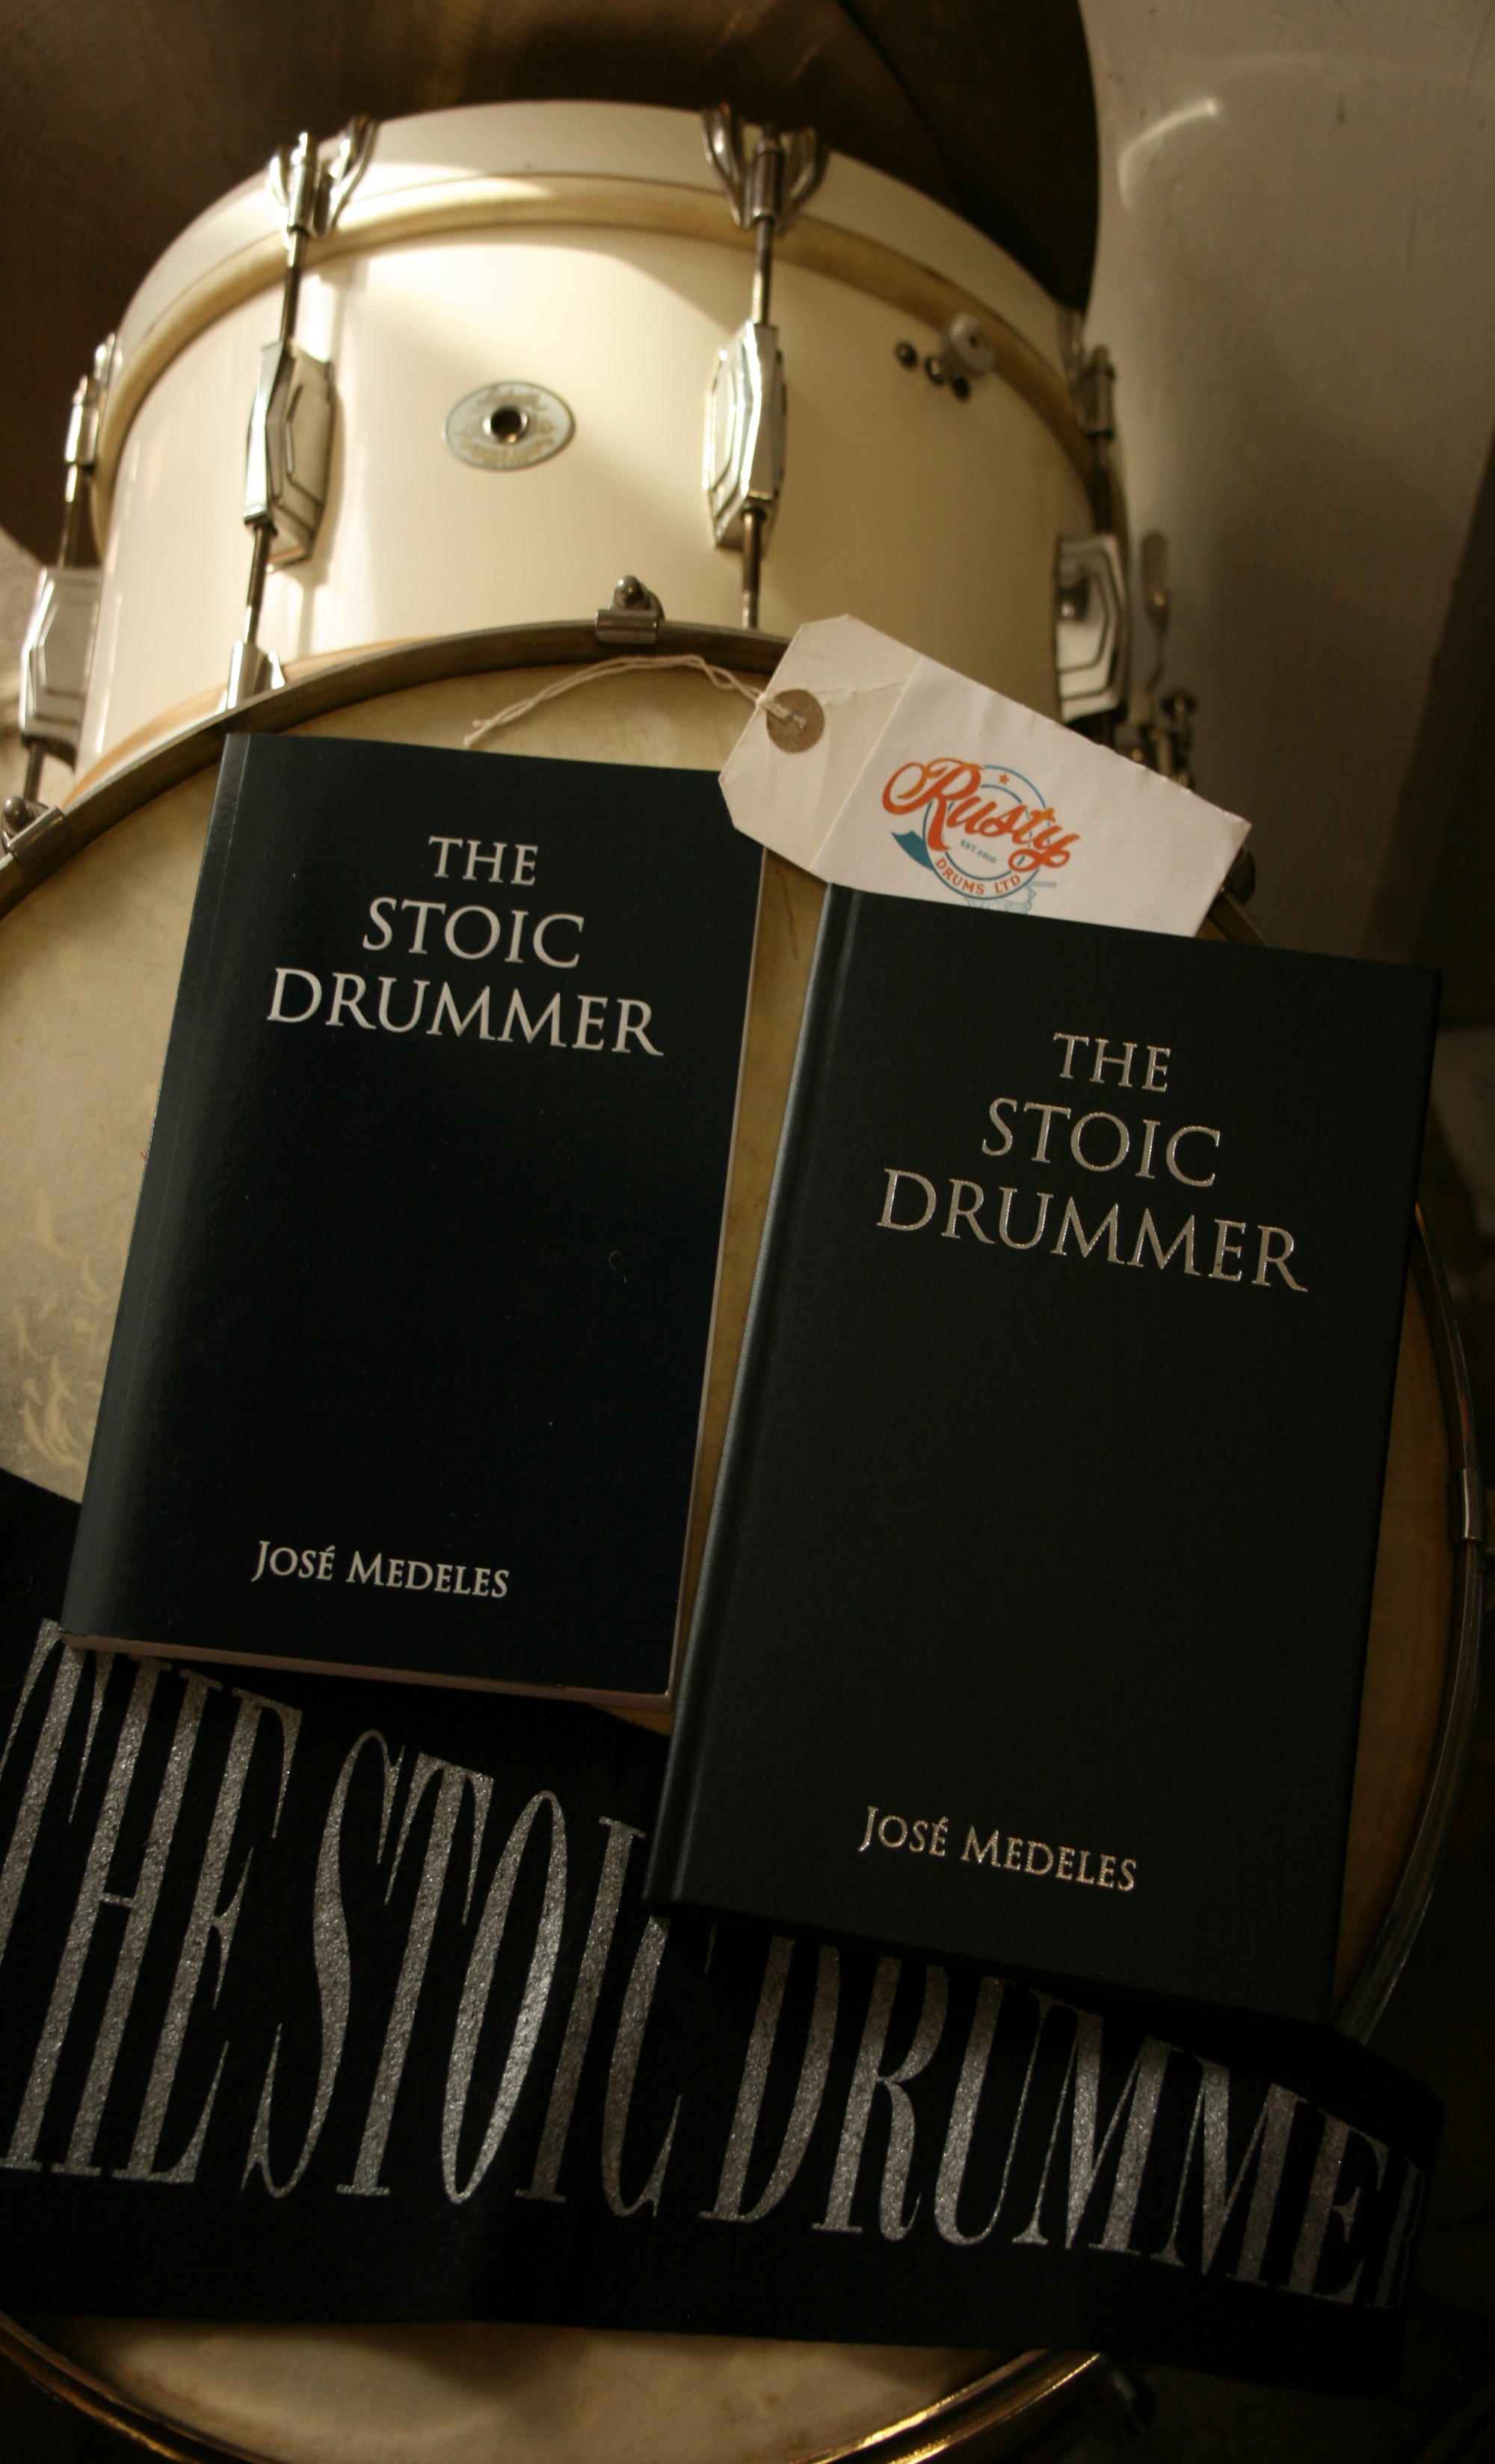 The Stoic Drummer